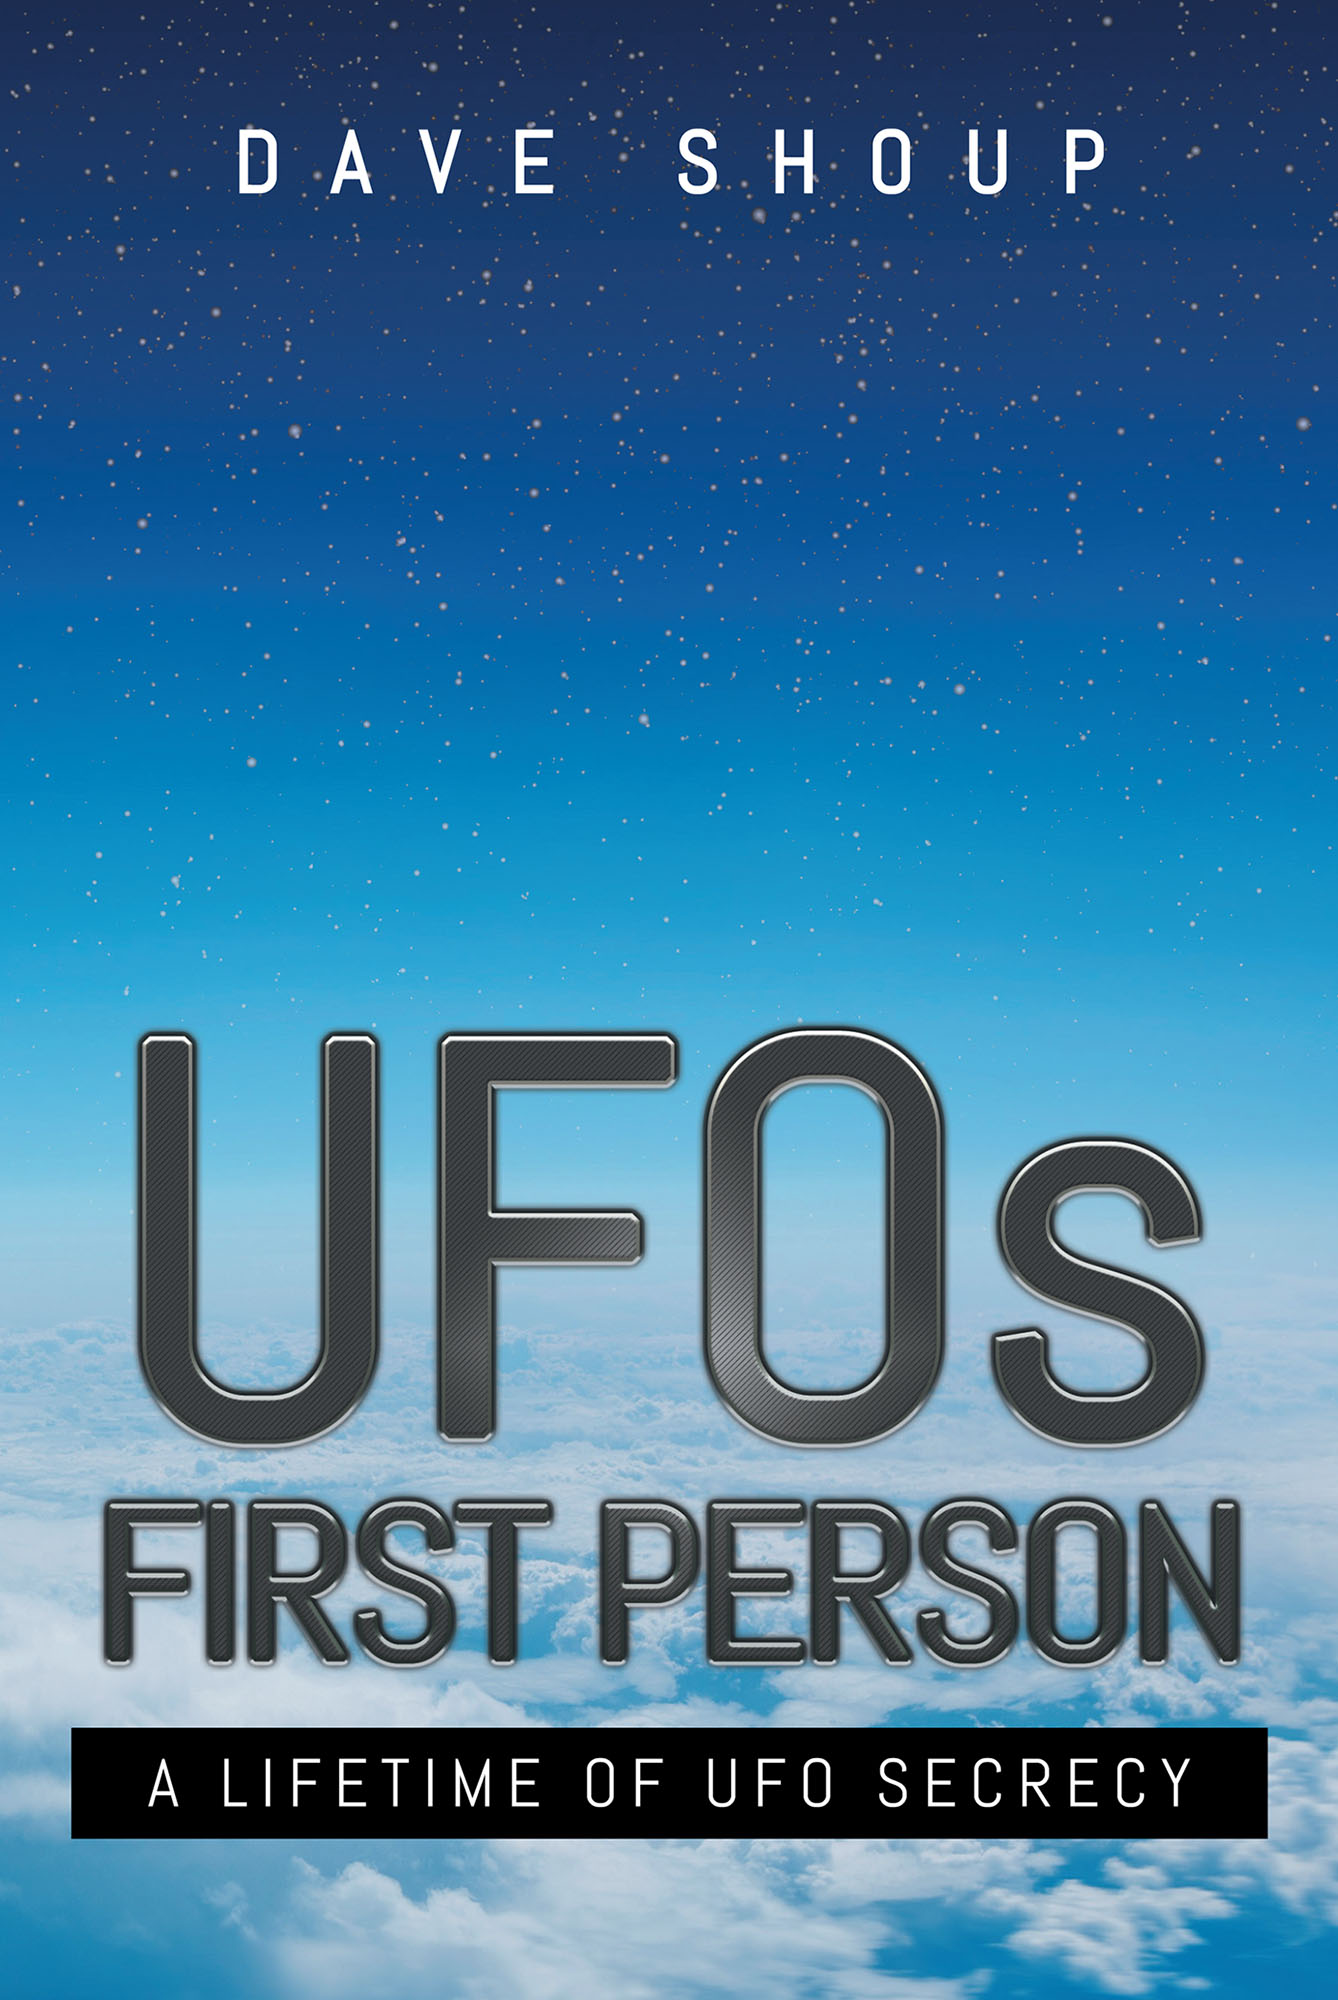 Dave Shoup’s New Book “UFOs First Person A Lifetime of UFO Secrecy